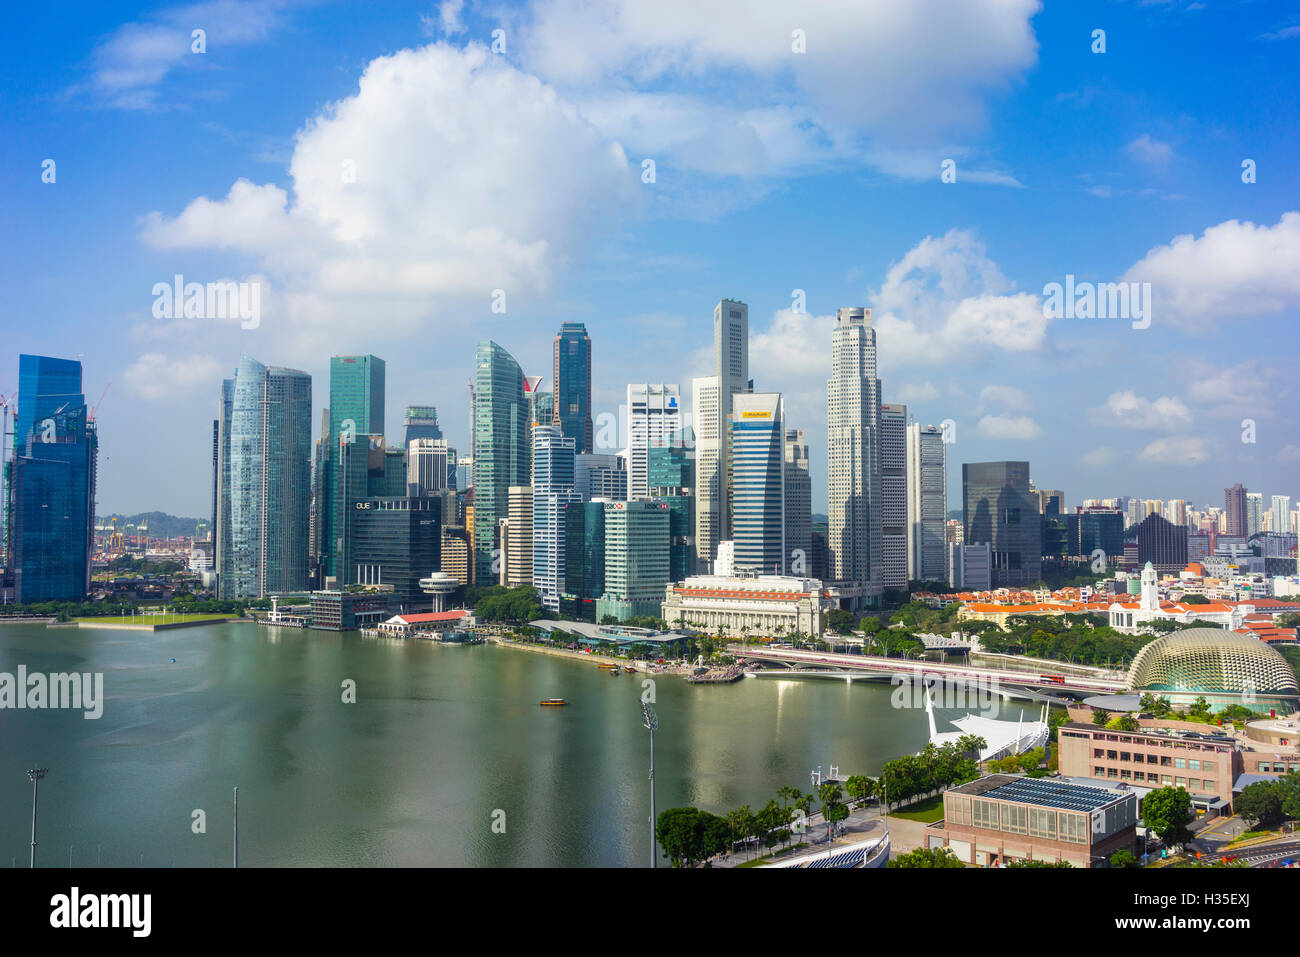 Singapore skyline, skyscrapers with the Fullerton Hotel and Jubilee Bridge in the foreground by Marina Bay, Singapore Stock Photo